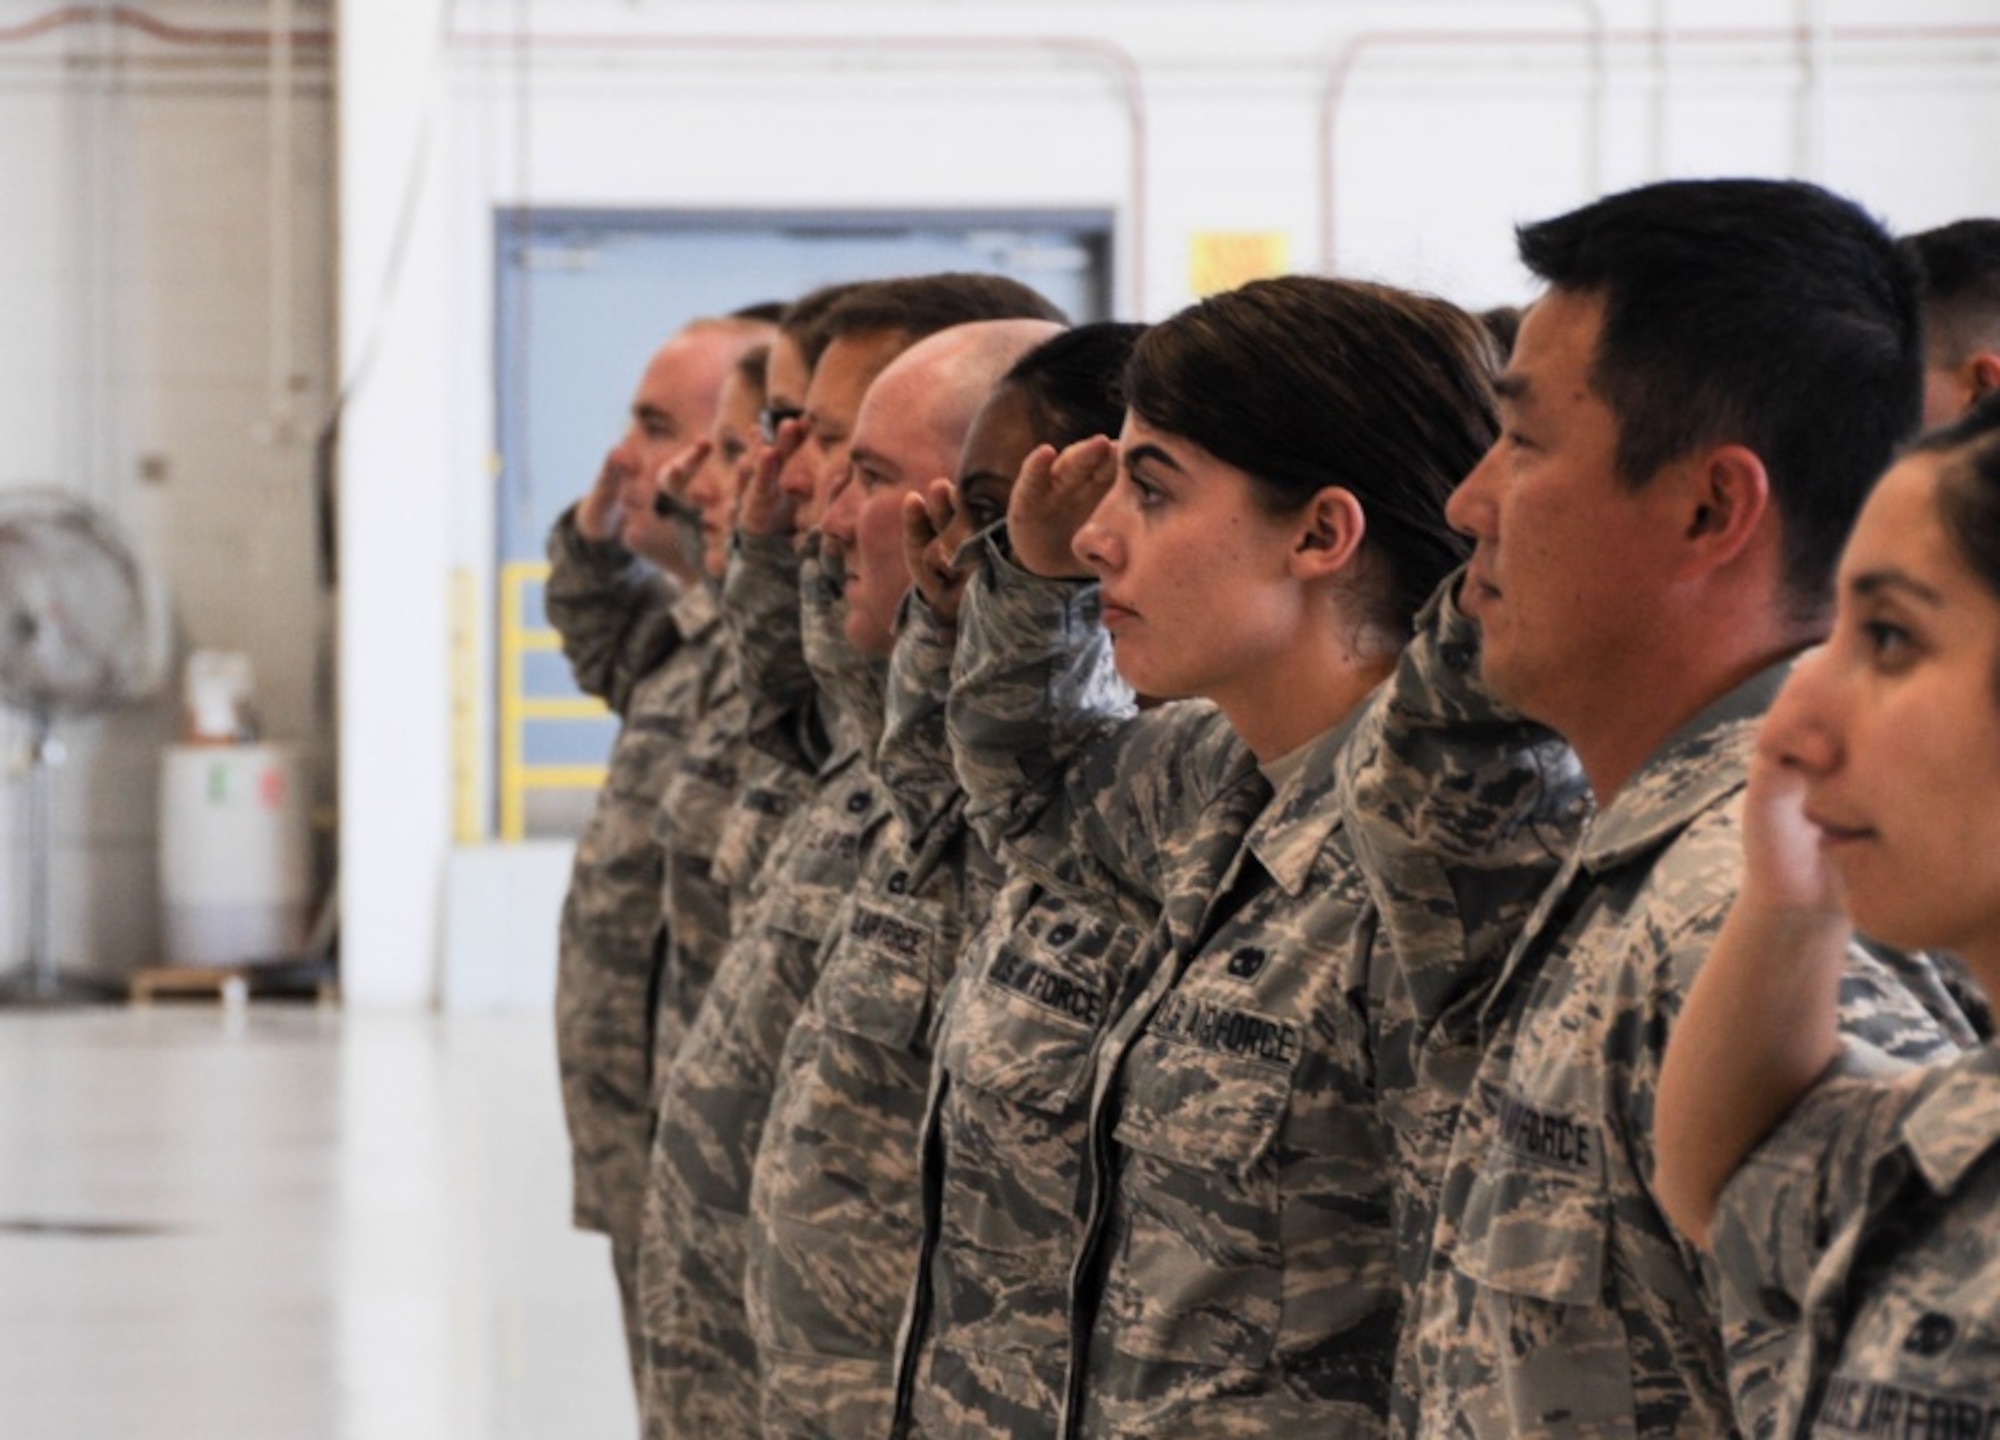 Airmen from the 442d Aircraft Maintenance Squadron salute their new commander during an assumption of command ceremony at Whiteman Air Force Base, Mo., July 8, 2017. More than 200 reserve and active duty airmen in six different specialties make up the squadron that is responsible for a fleet of 28 A-10C Thunderbolt II aircraft. (U.S. Air Force photo by Senior Airman Missy Sterling)